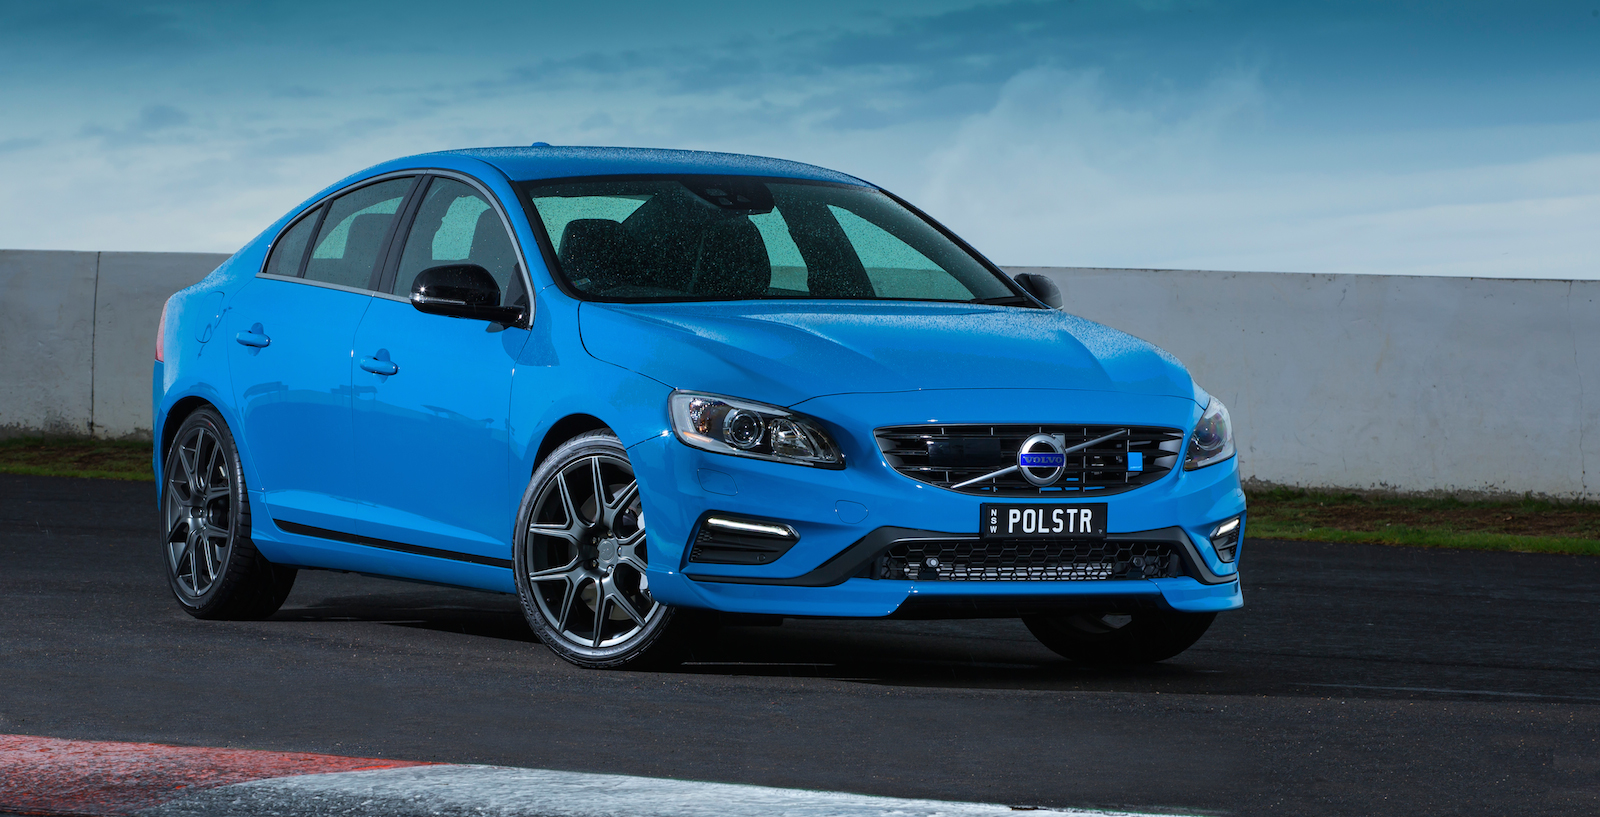 Volvo S60 sales boosted by V8 Supercars entry, says